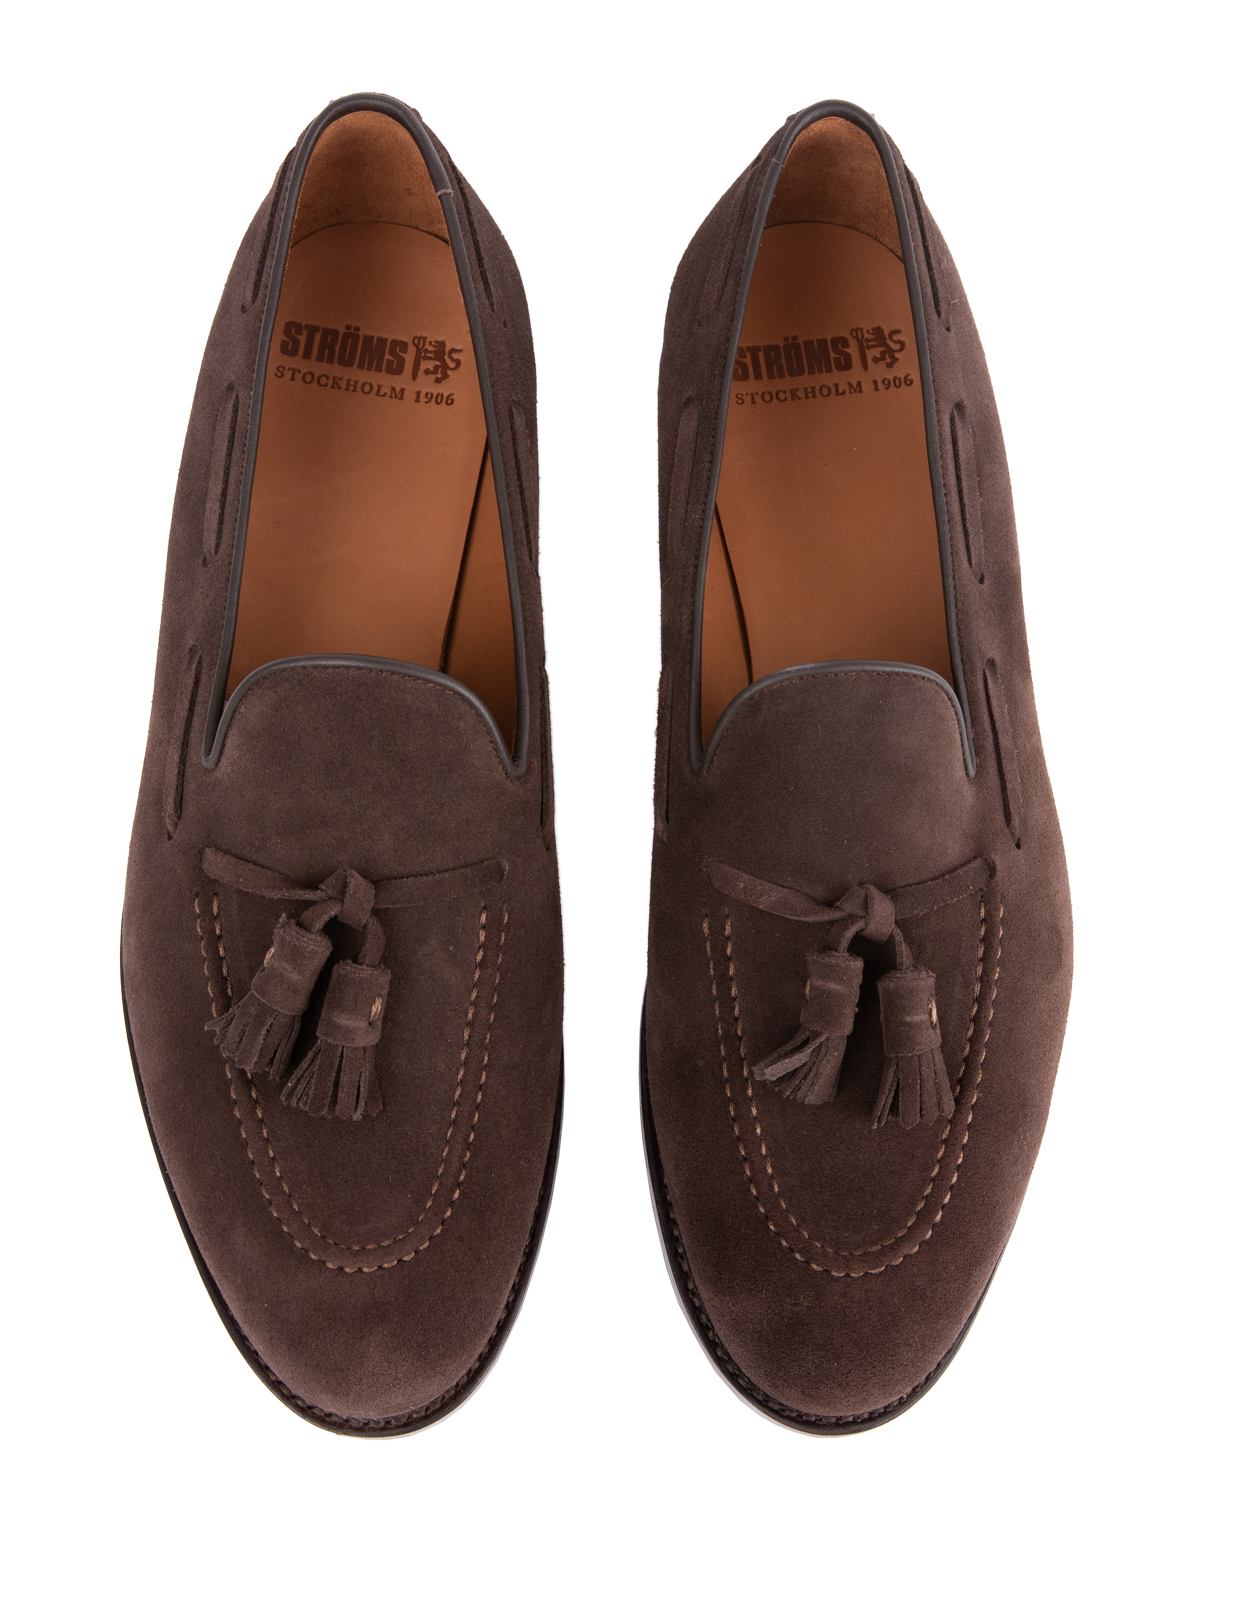 Tassel Loafers Suede Bitter Chocolate Stl 8.5